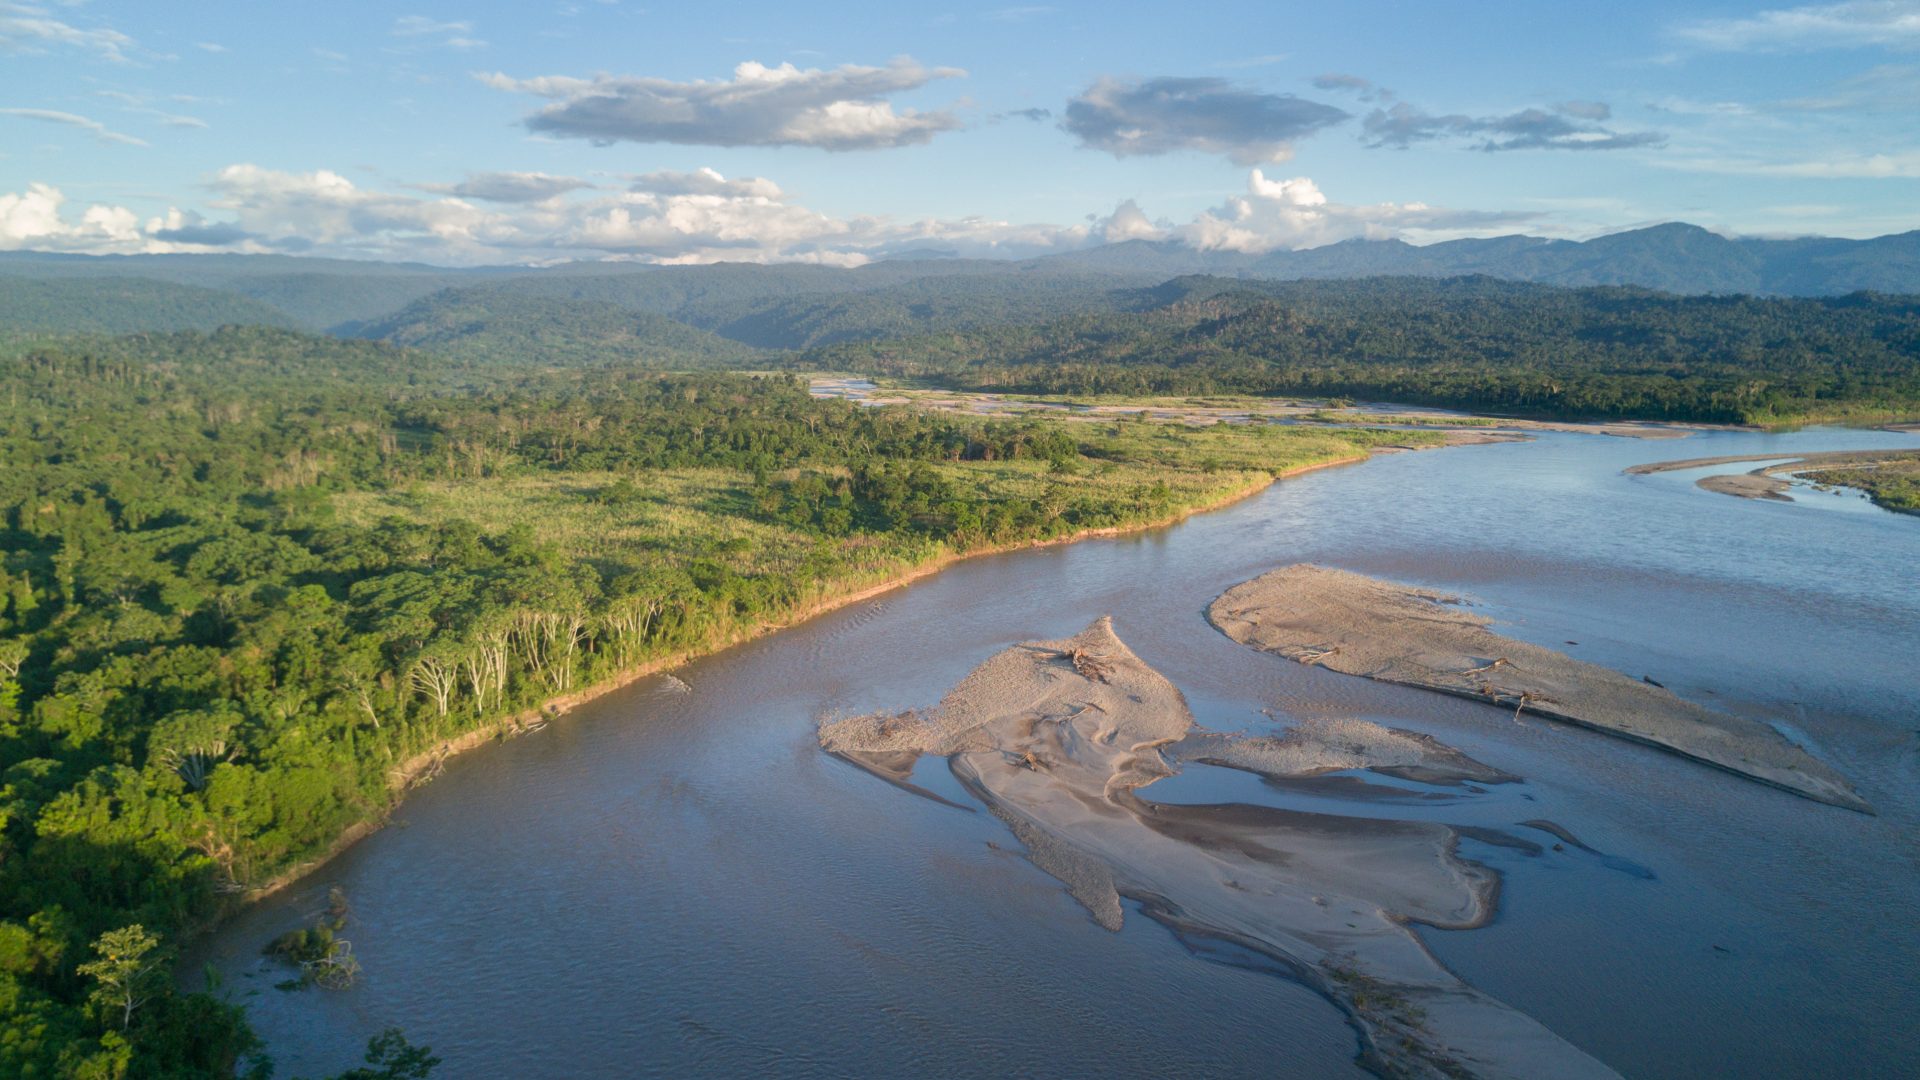 Aerial of an Amazon village by the Rio Ene river.